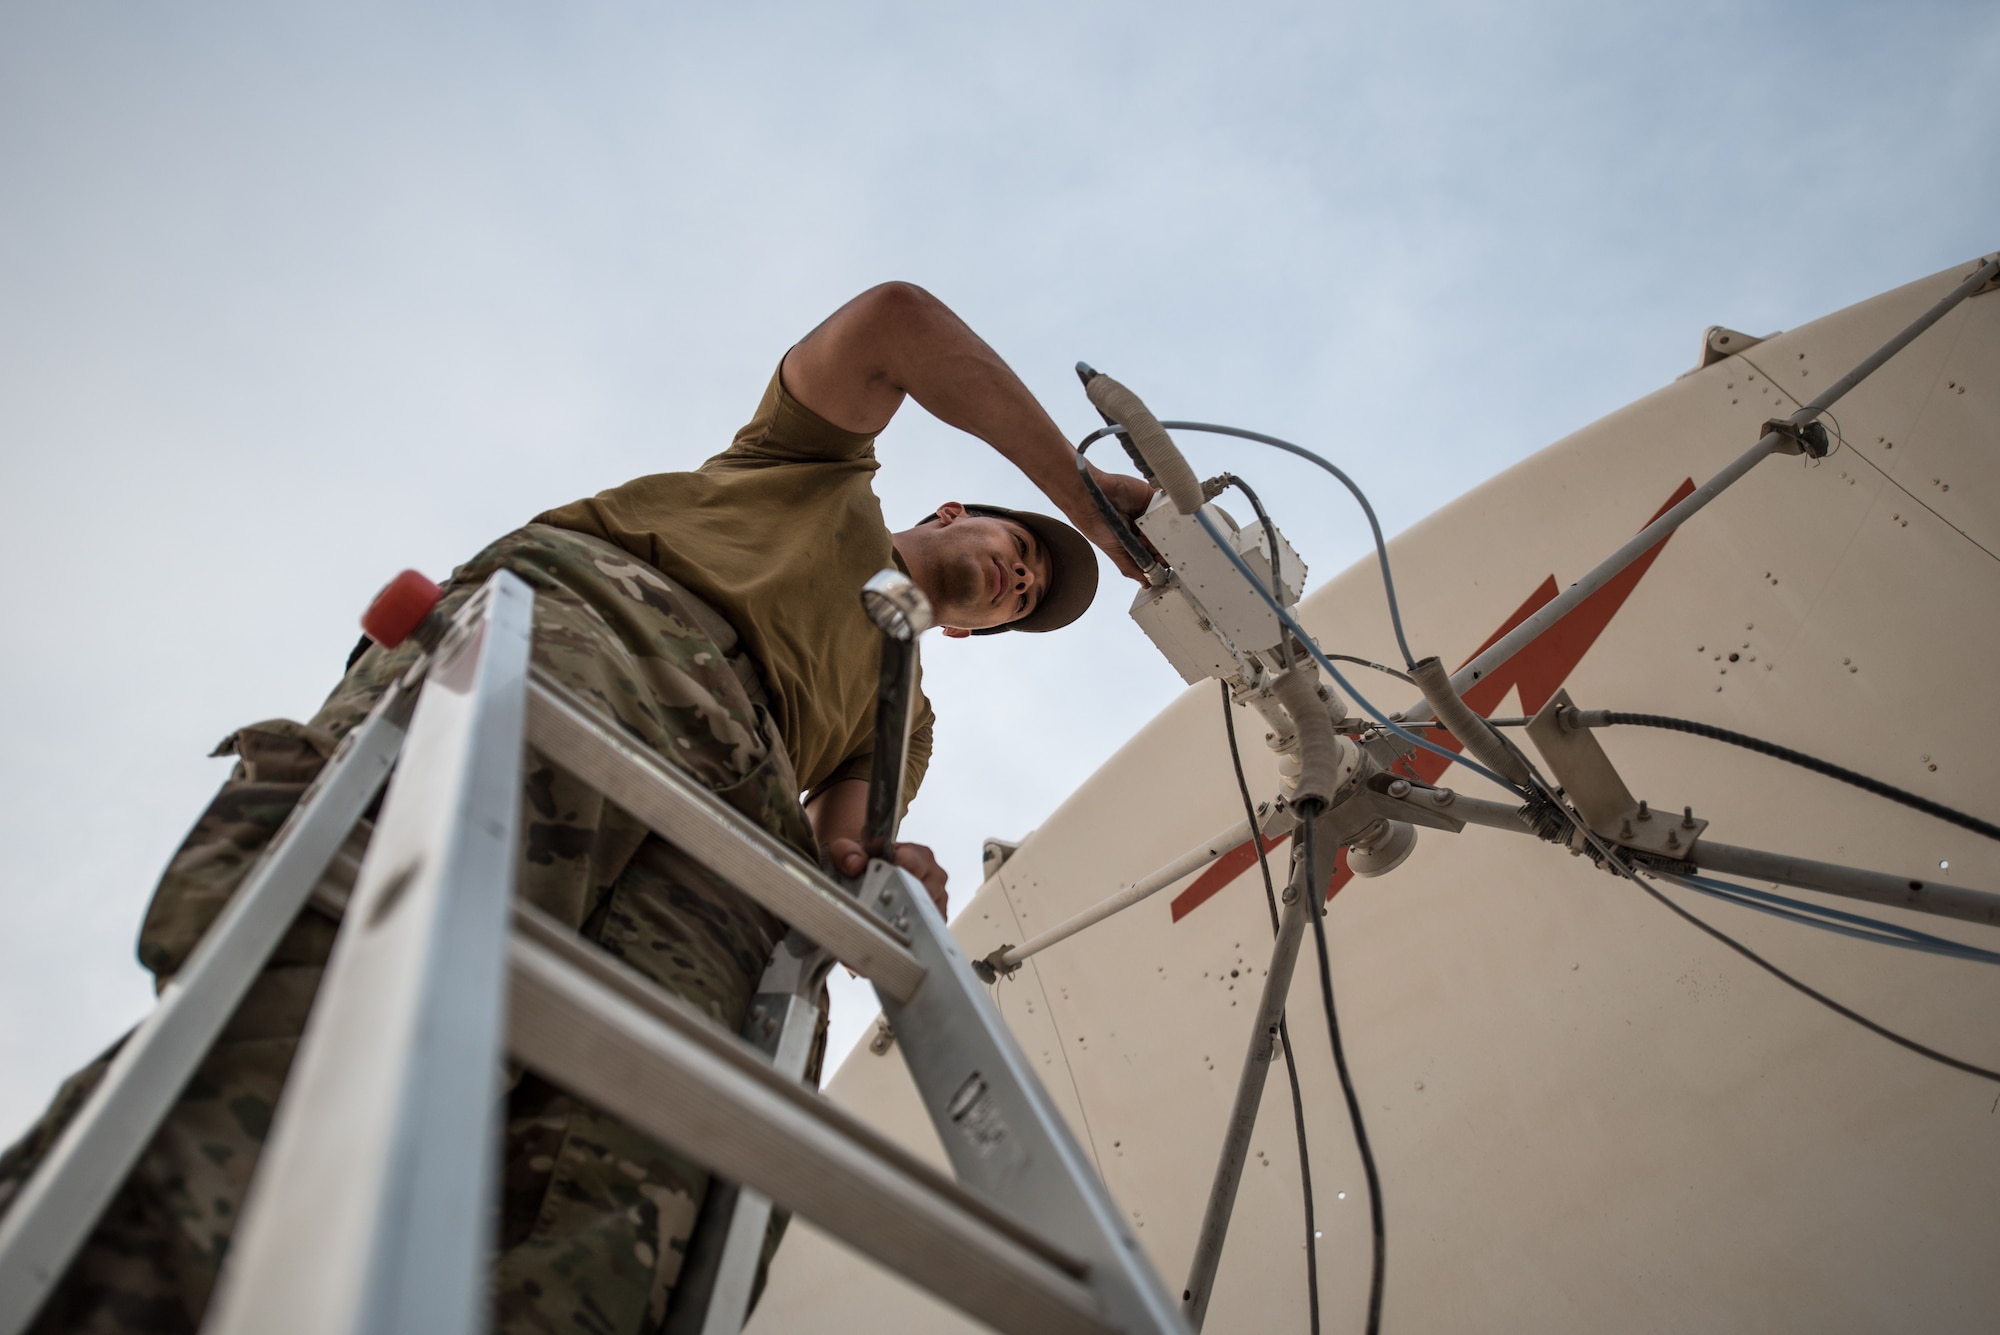 U.S. Air Force Staff Sgt. Joshua Foster, a radio frequency transmissions technician with the 379th Operations Support Squadron, uses a spectrum analyzer to perform diagnostics on a satellite at Al Udeid Air Base, Qatar, Mar. 30, 2018. Silent Sentry protects critical satellite communication links by employing multiple weapons systems for electronic warfare. (U.S. Air National Guard photo by Master Sgt. Phil Speck)